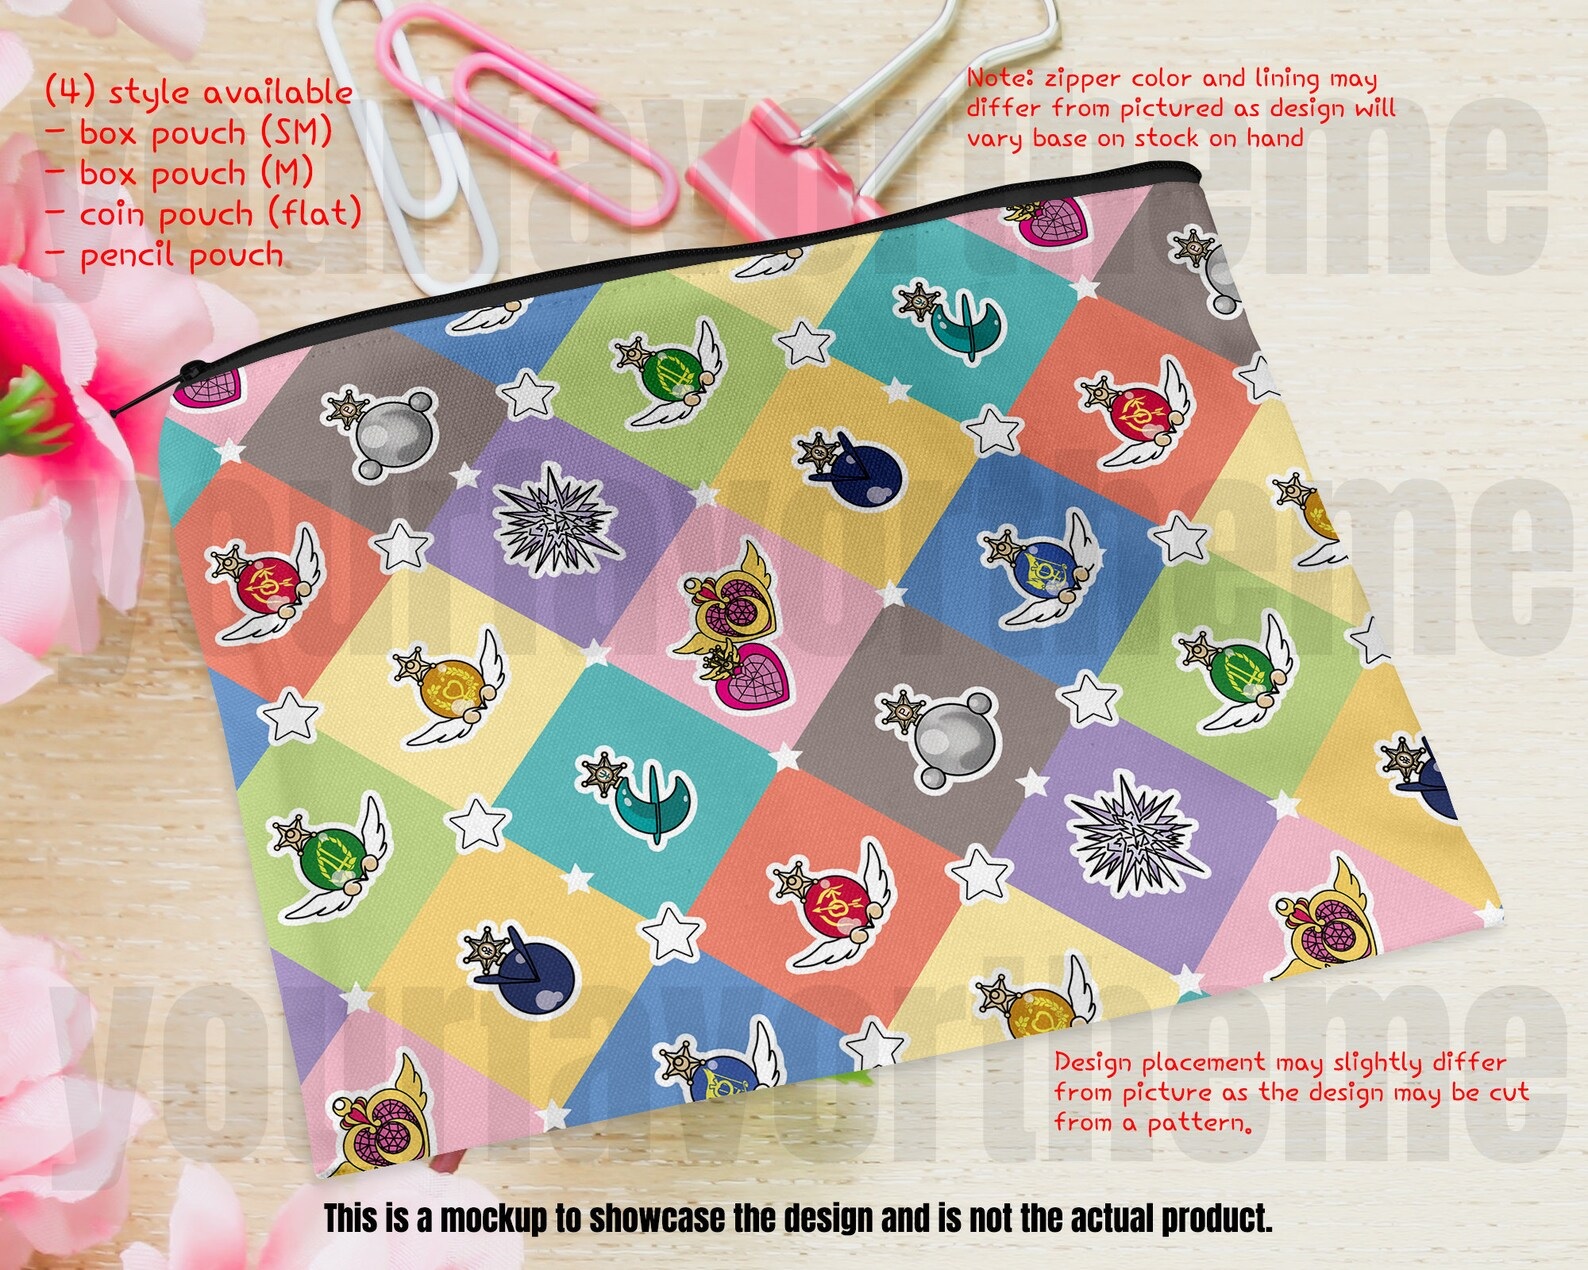 A coin purse with little hearts, moons, and other designs patterned on it